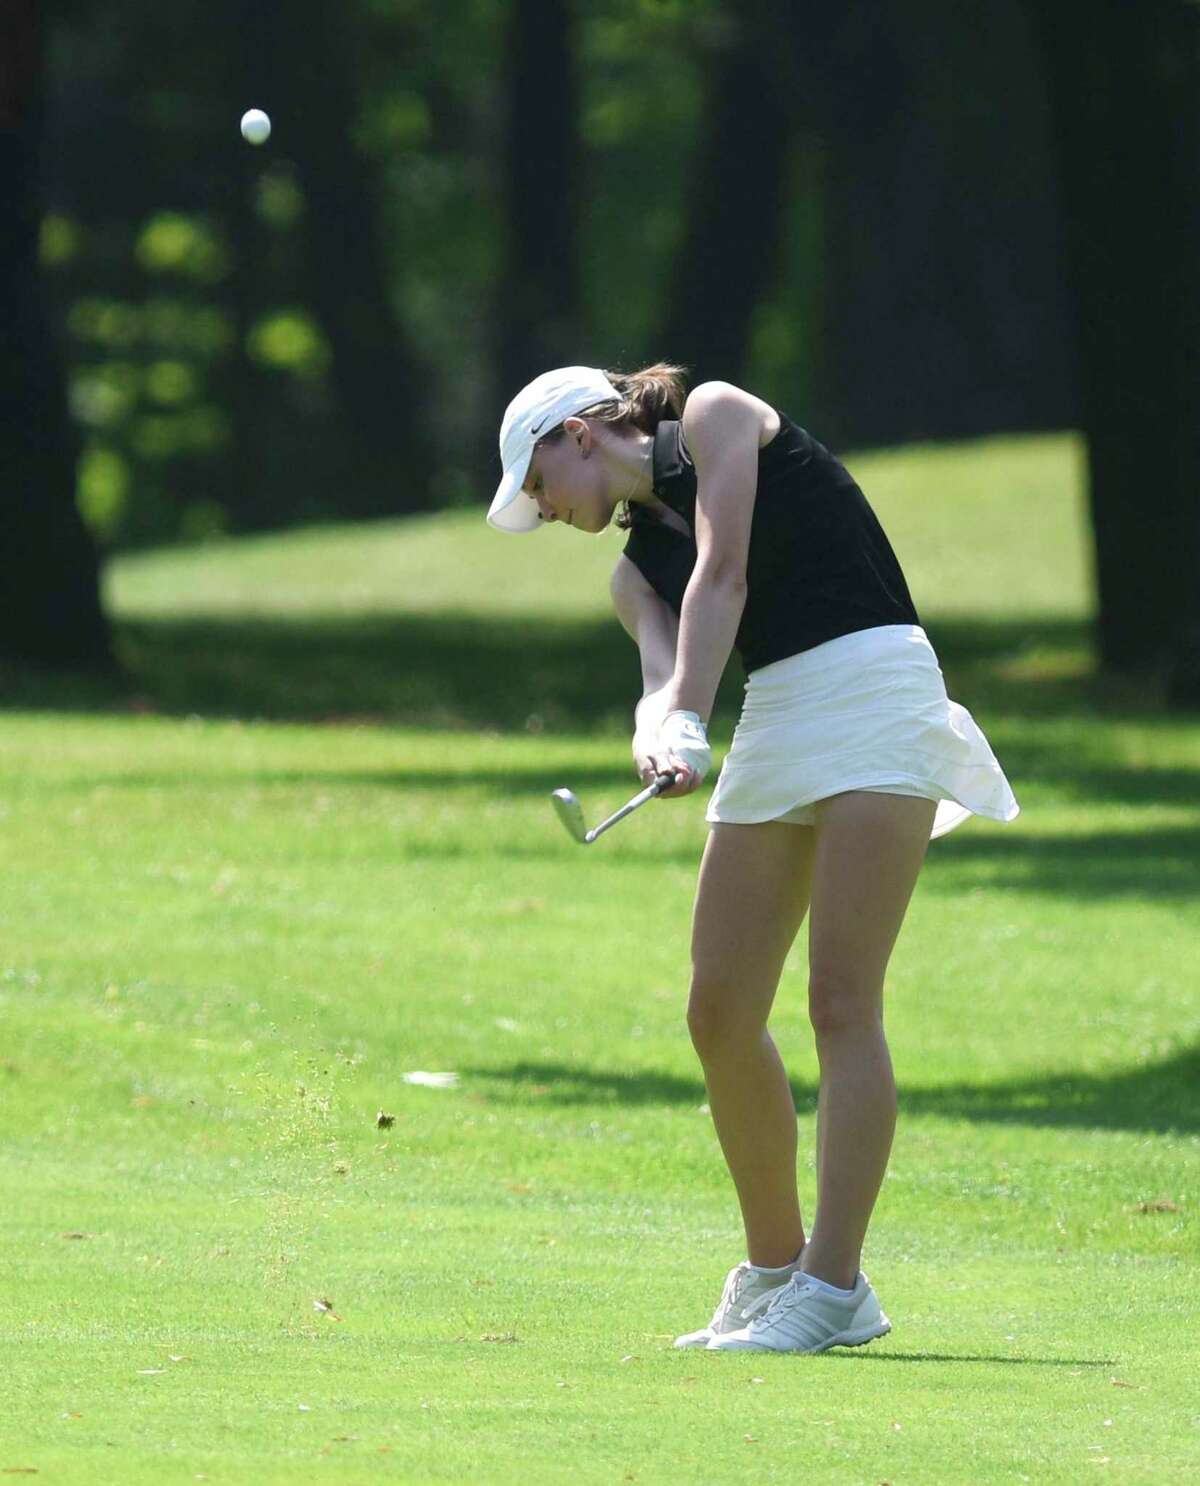 Sydney Nethercott plays in the Town Wide Women's Golf Tournament at Griffith E. Harris Golf Course in Greenwich, Conn. Monday, June 28, 2021. Nethercott won the Town Wide flight with a score of 70.